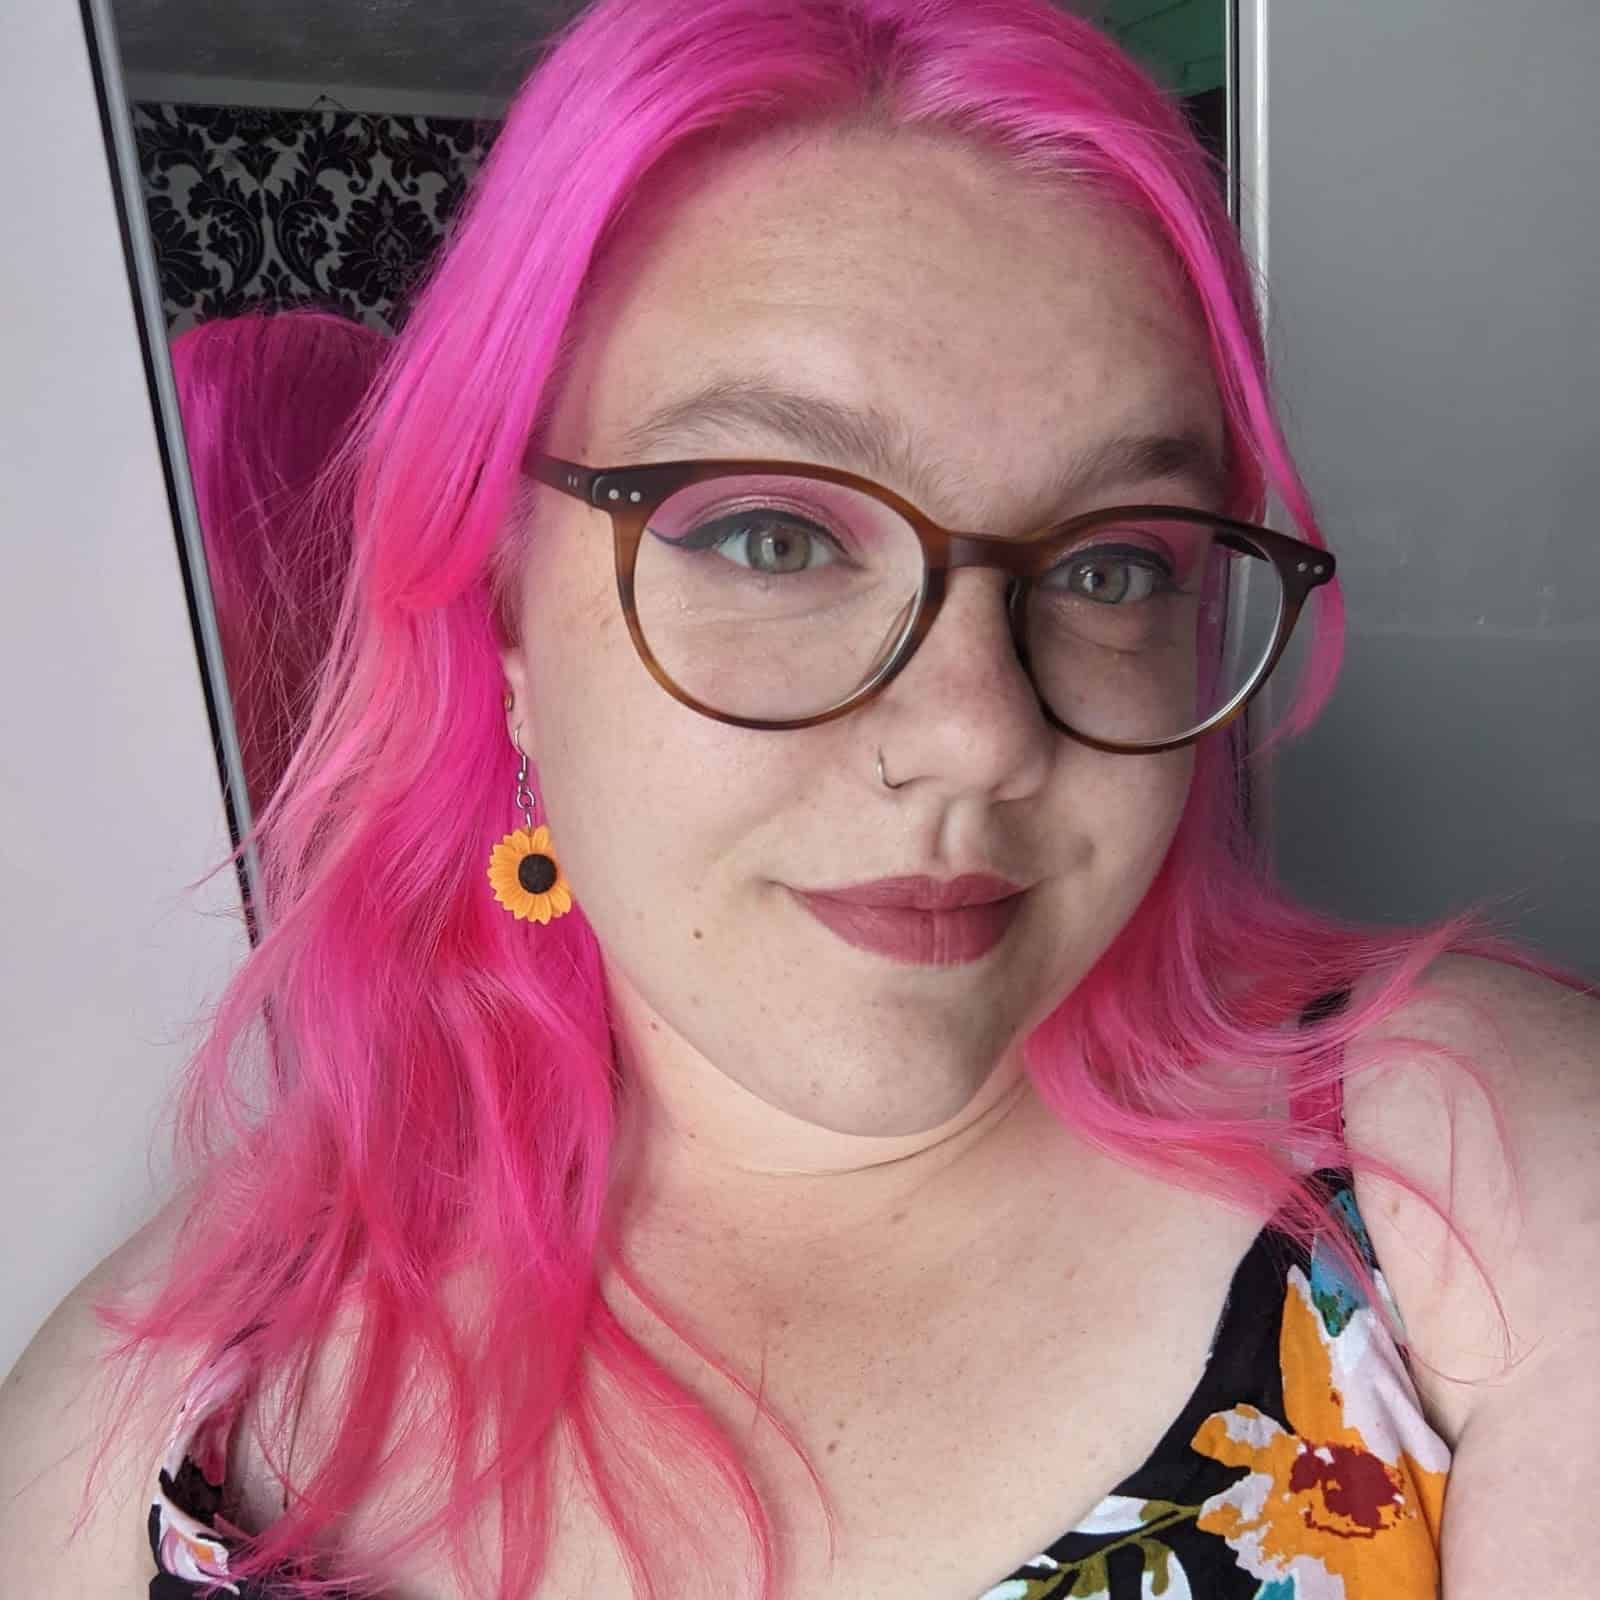 Southampton Hub Programme Manager, Catherine Taplin-Thorpe is smiling at the camera. Catherine has bright pink hair and pink eyeshadow and lipstick. Catherine is wearing sunflower earrings and a floral top. 